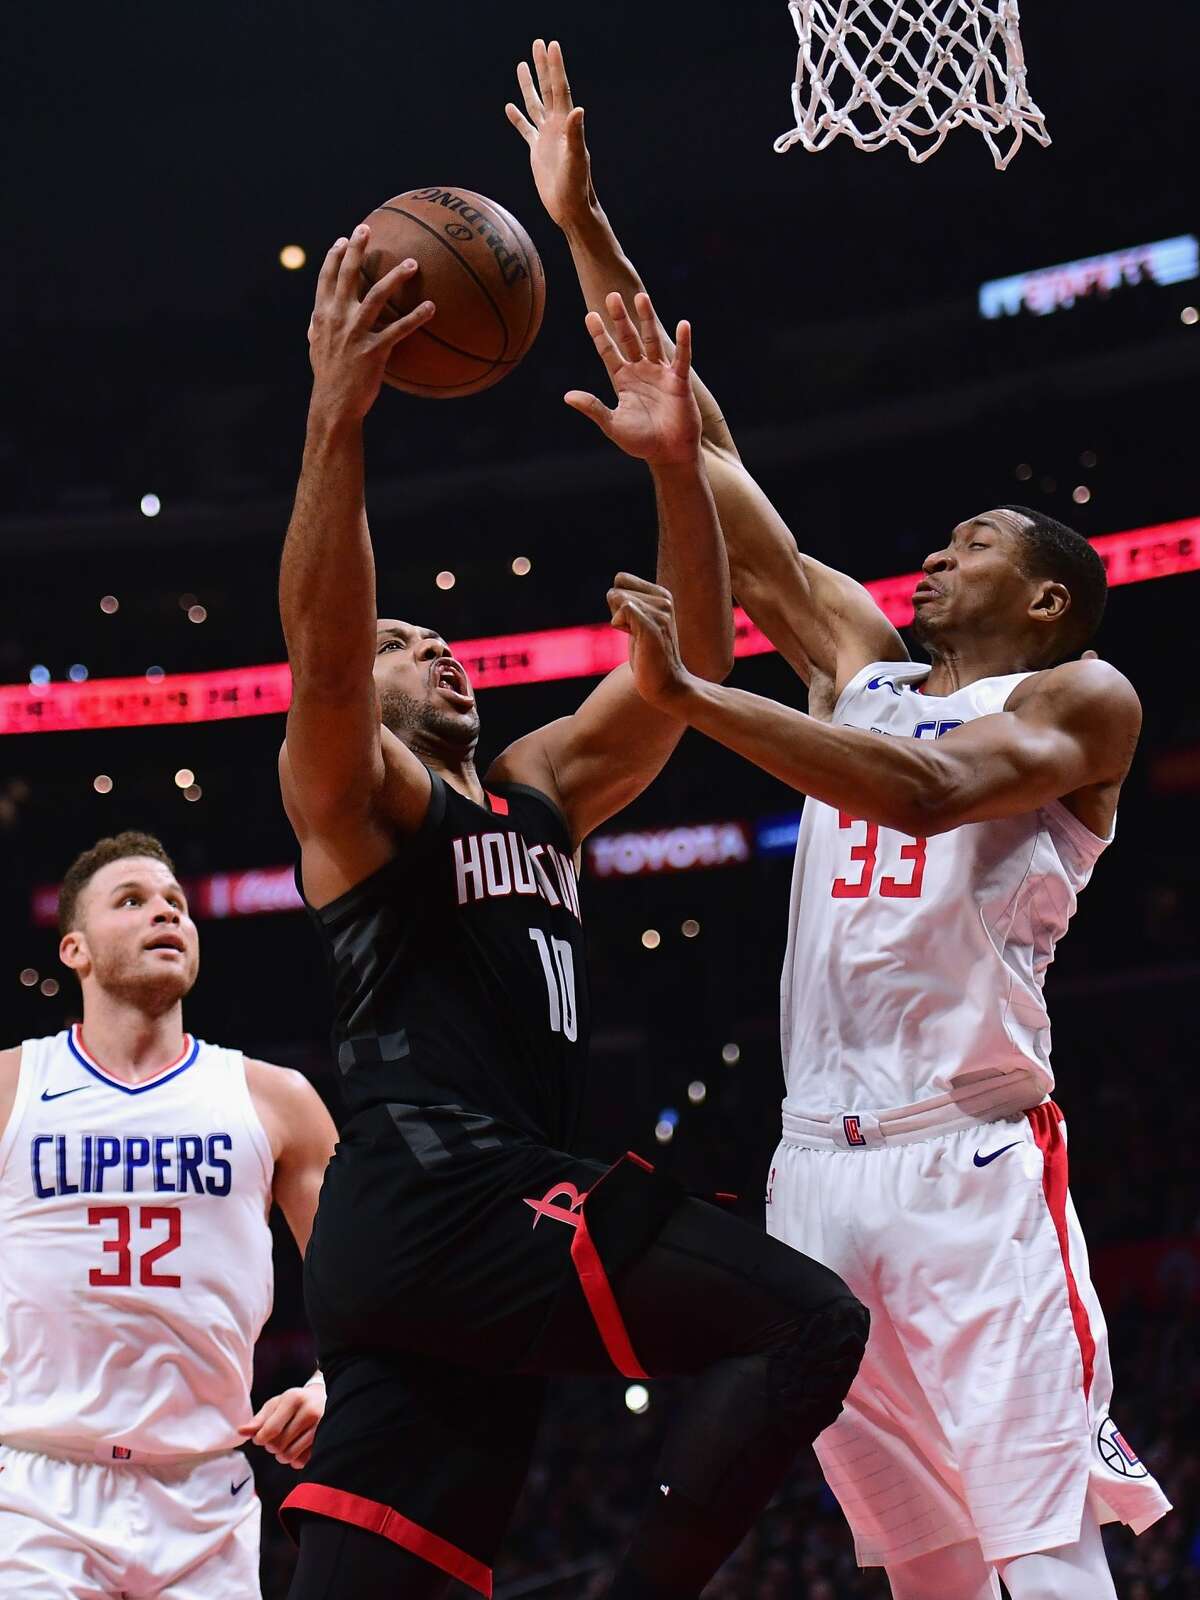 PHOTOS: 8 key moments that sparked Rockets-Clippers confrontation  1. With 3:32 left and the Clippers leading 106-98, Eric Gordon drove to the rim, only to have the Clippers’ Wesley Johnson two-hand swat the ball against the backboard. The Rockets screamed for a goaltending, with replays showing the ball did hit the backboard before Johnson reached it.